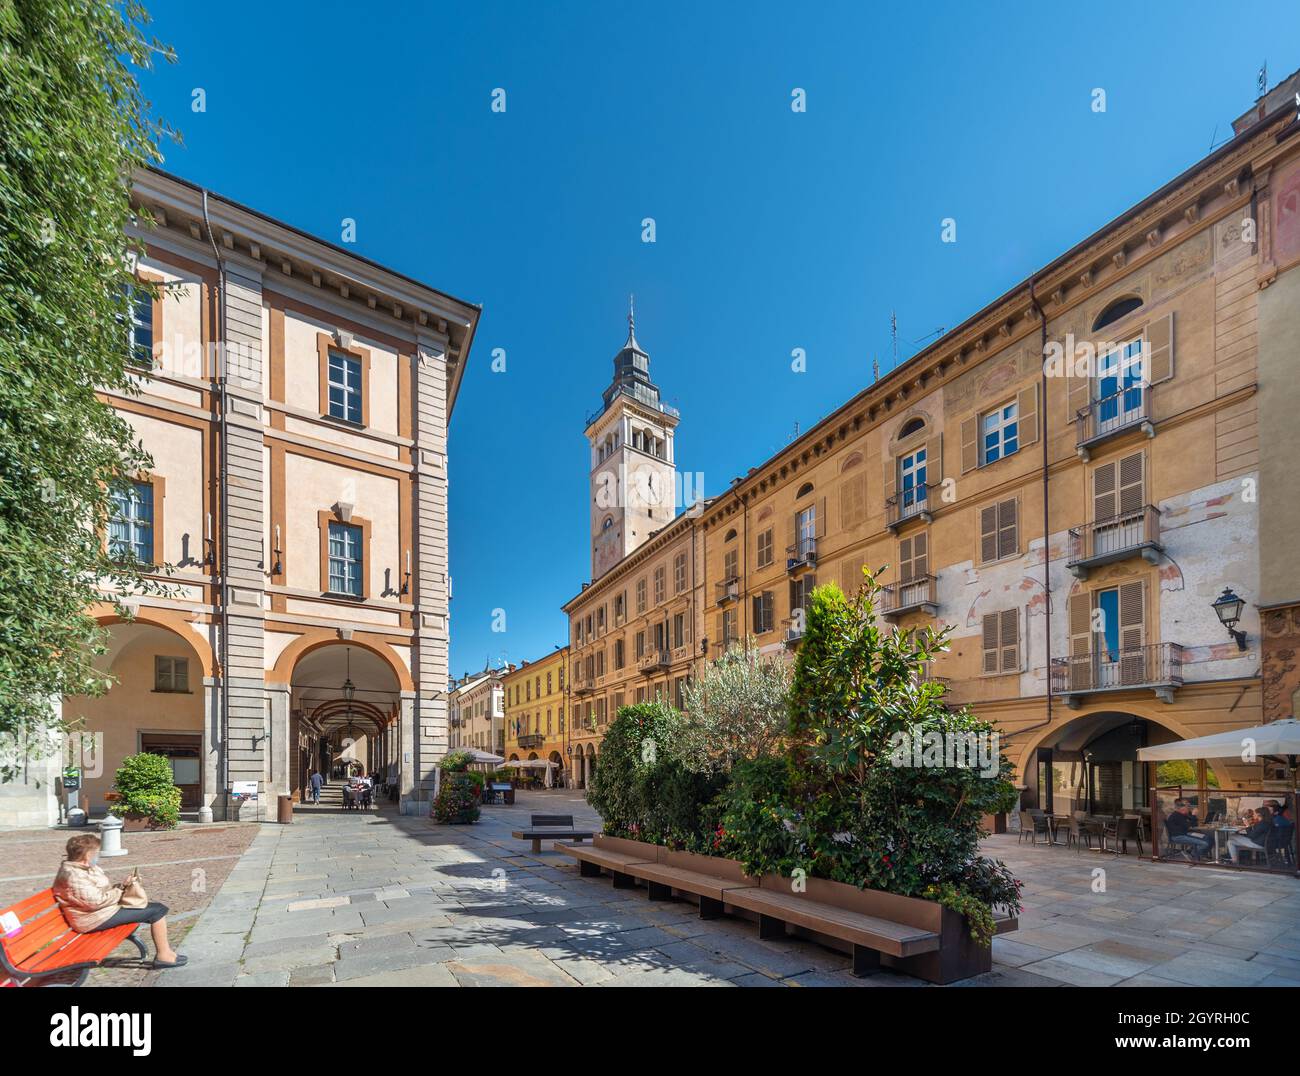 Cuneo, Piedmont, Italy - October 6, 2021: Largo (square) Giovanni Audifreddi near the town hall with a view of the civic tower Stock Photo